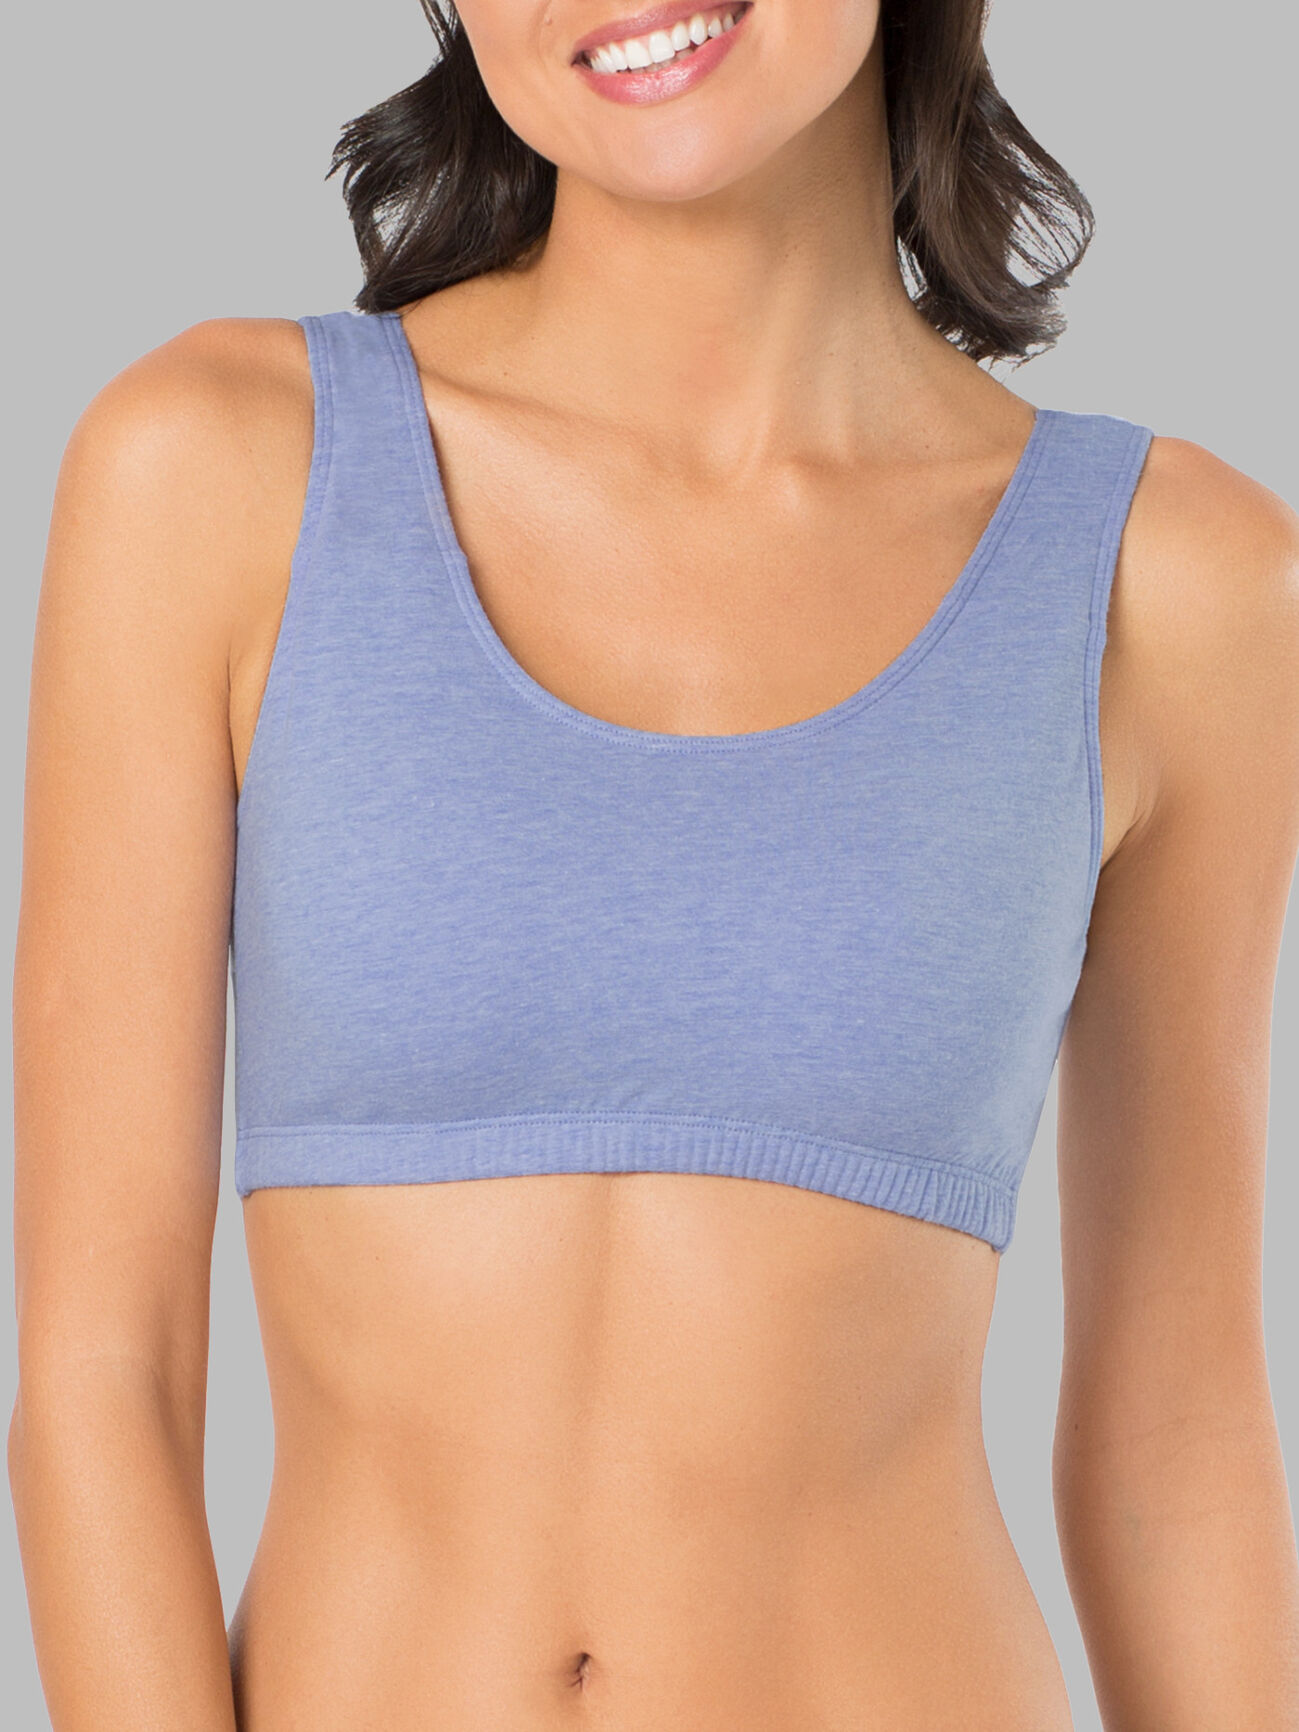 Women's Polyester / Spandex Bra for Fitness - Active Ladies